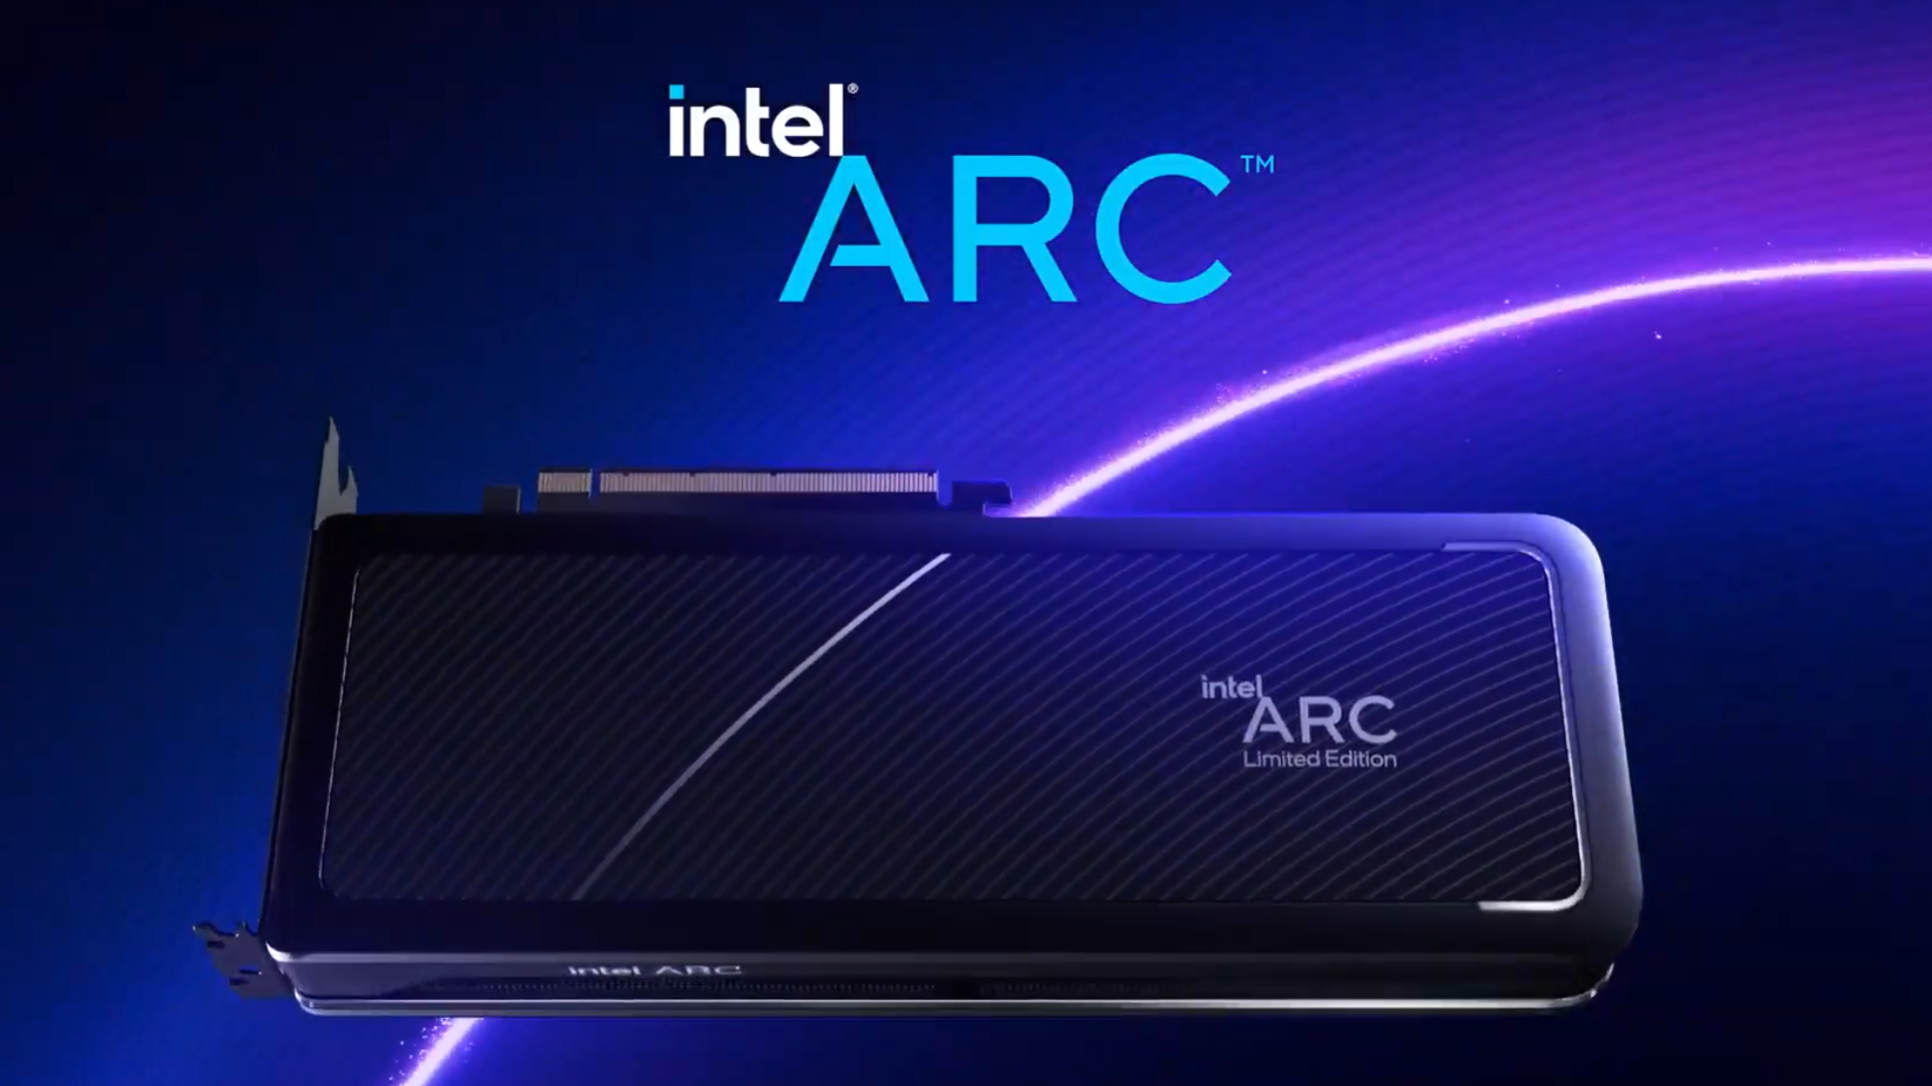 The first Intel Arc desktop graphics card reveal. The card floats against a blue background.